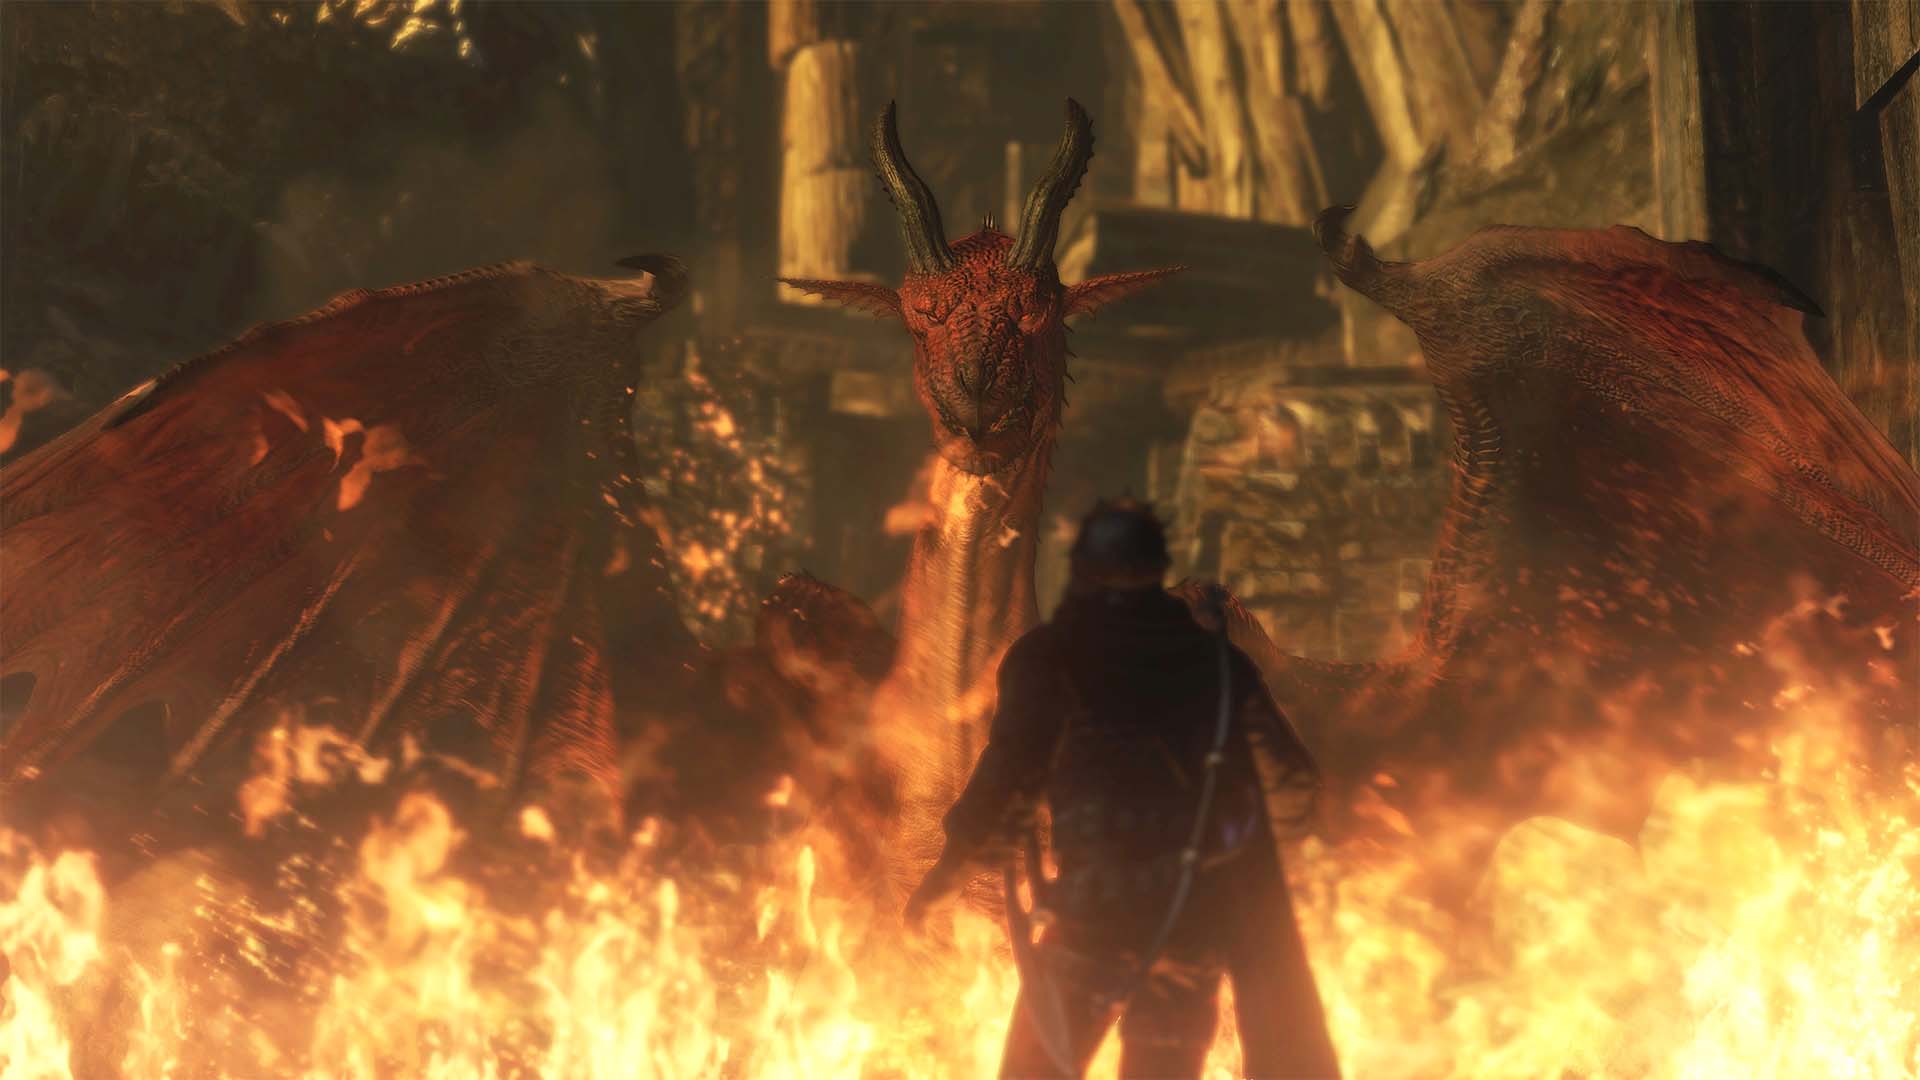 Dragon's Dogma 2 Officially Confirmed to be in Development